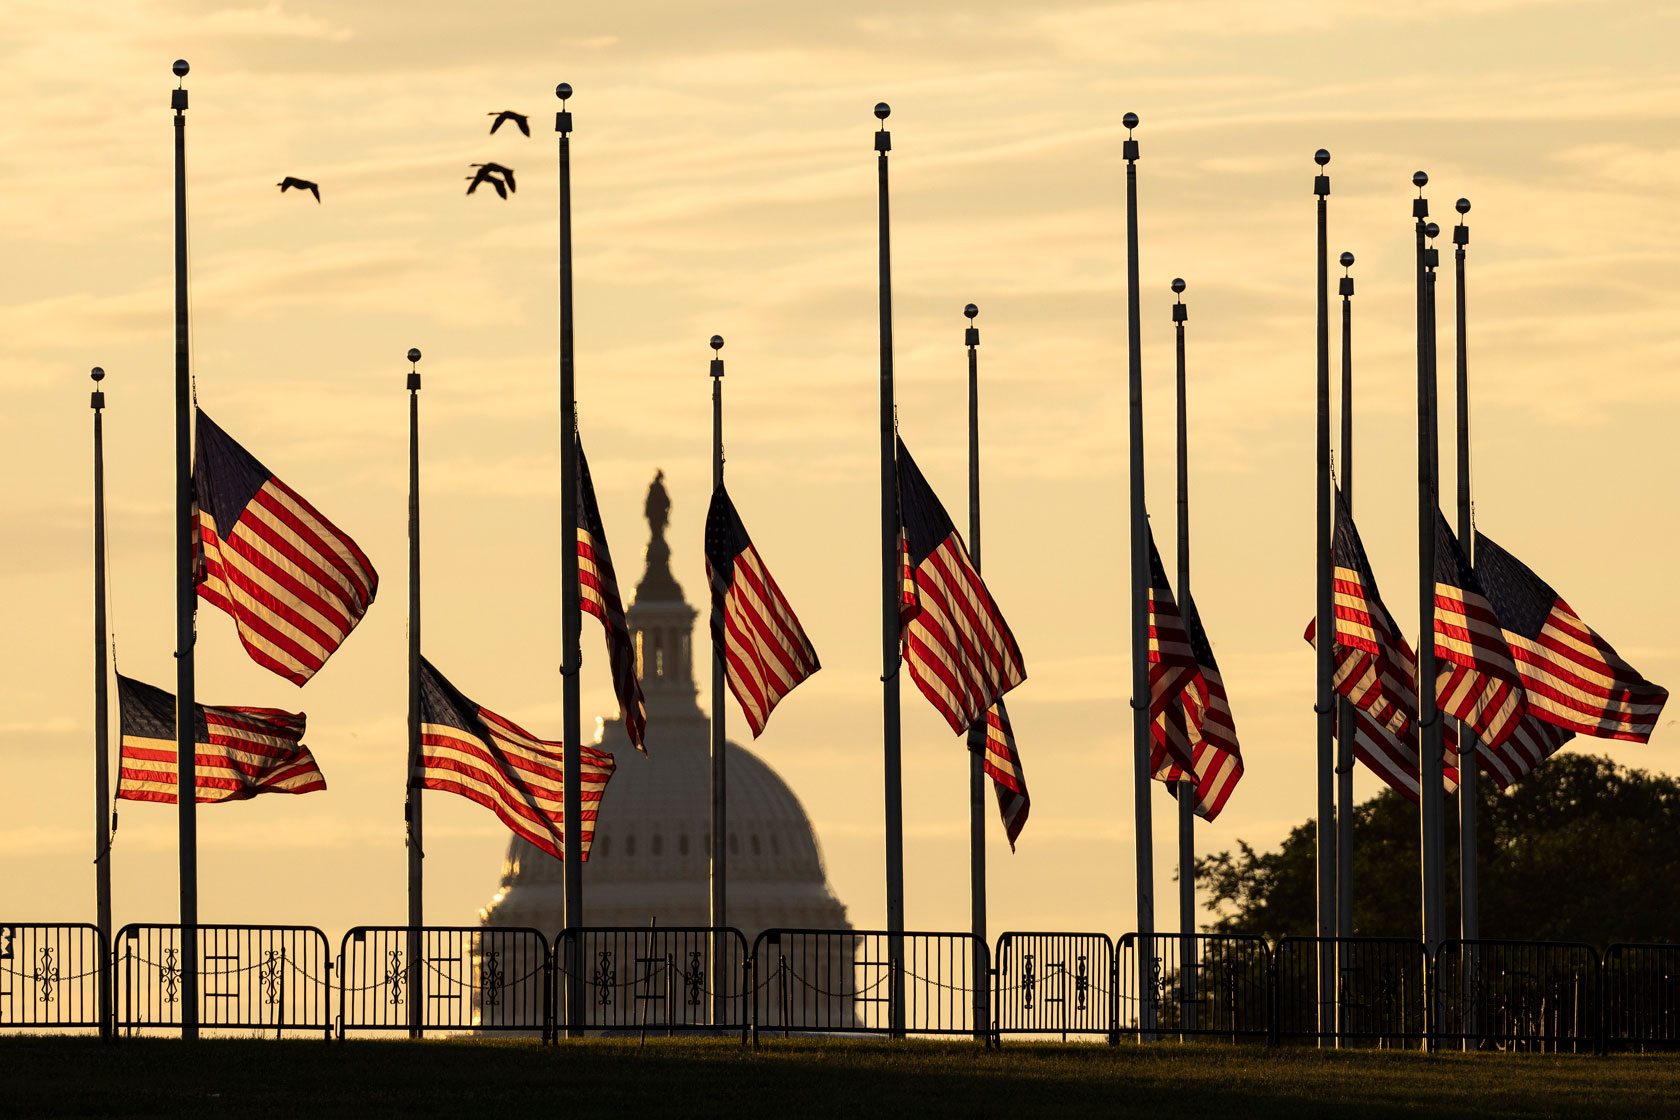 American flags are flown at half-staff at the base of the Washington Monument in Washington, D.C.